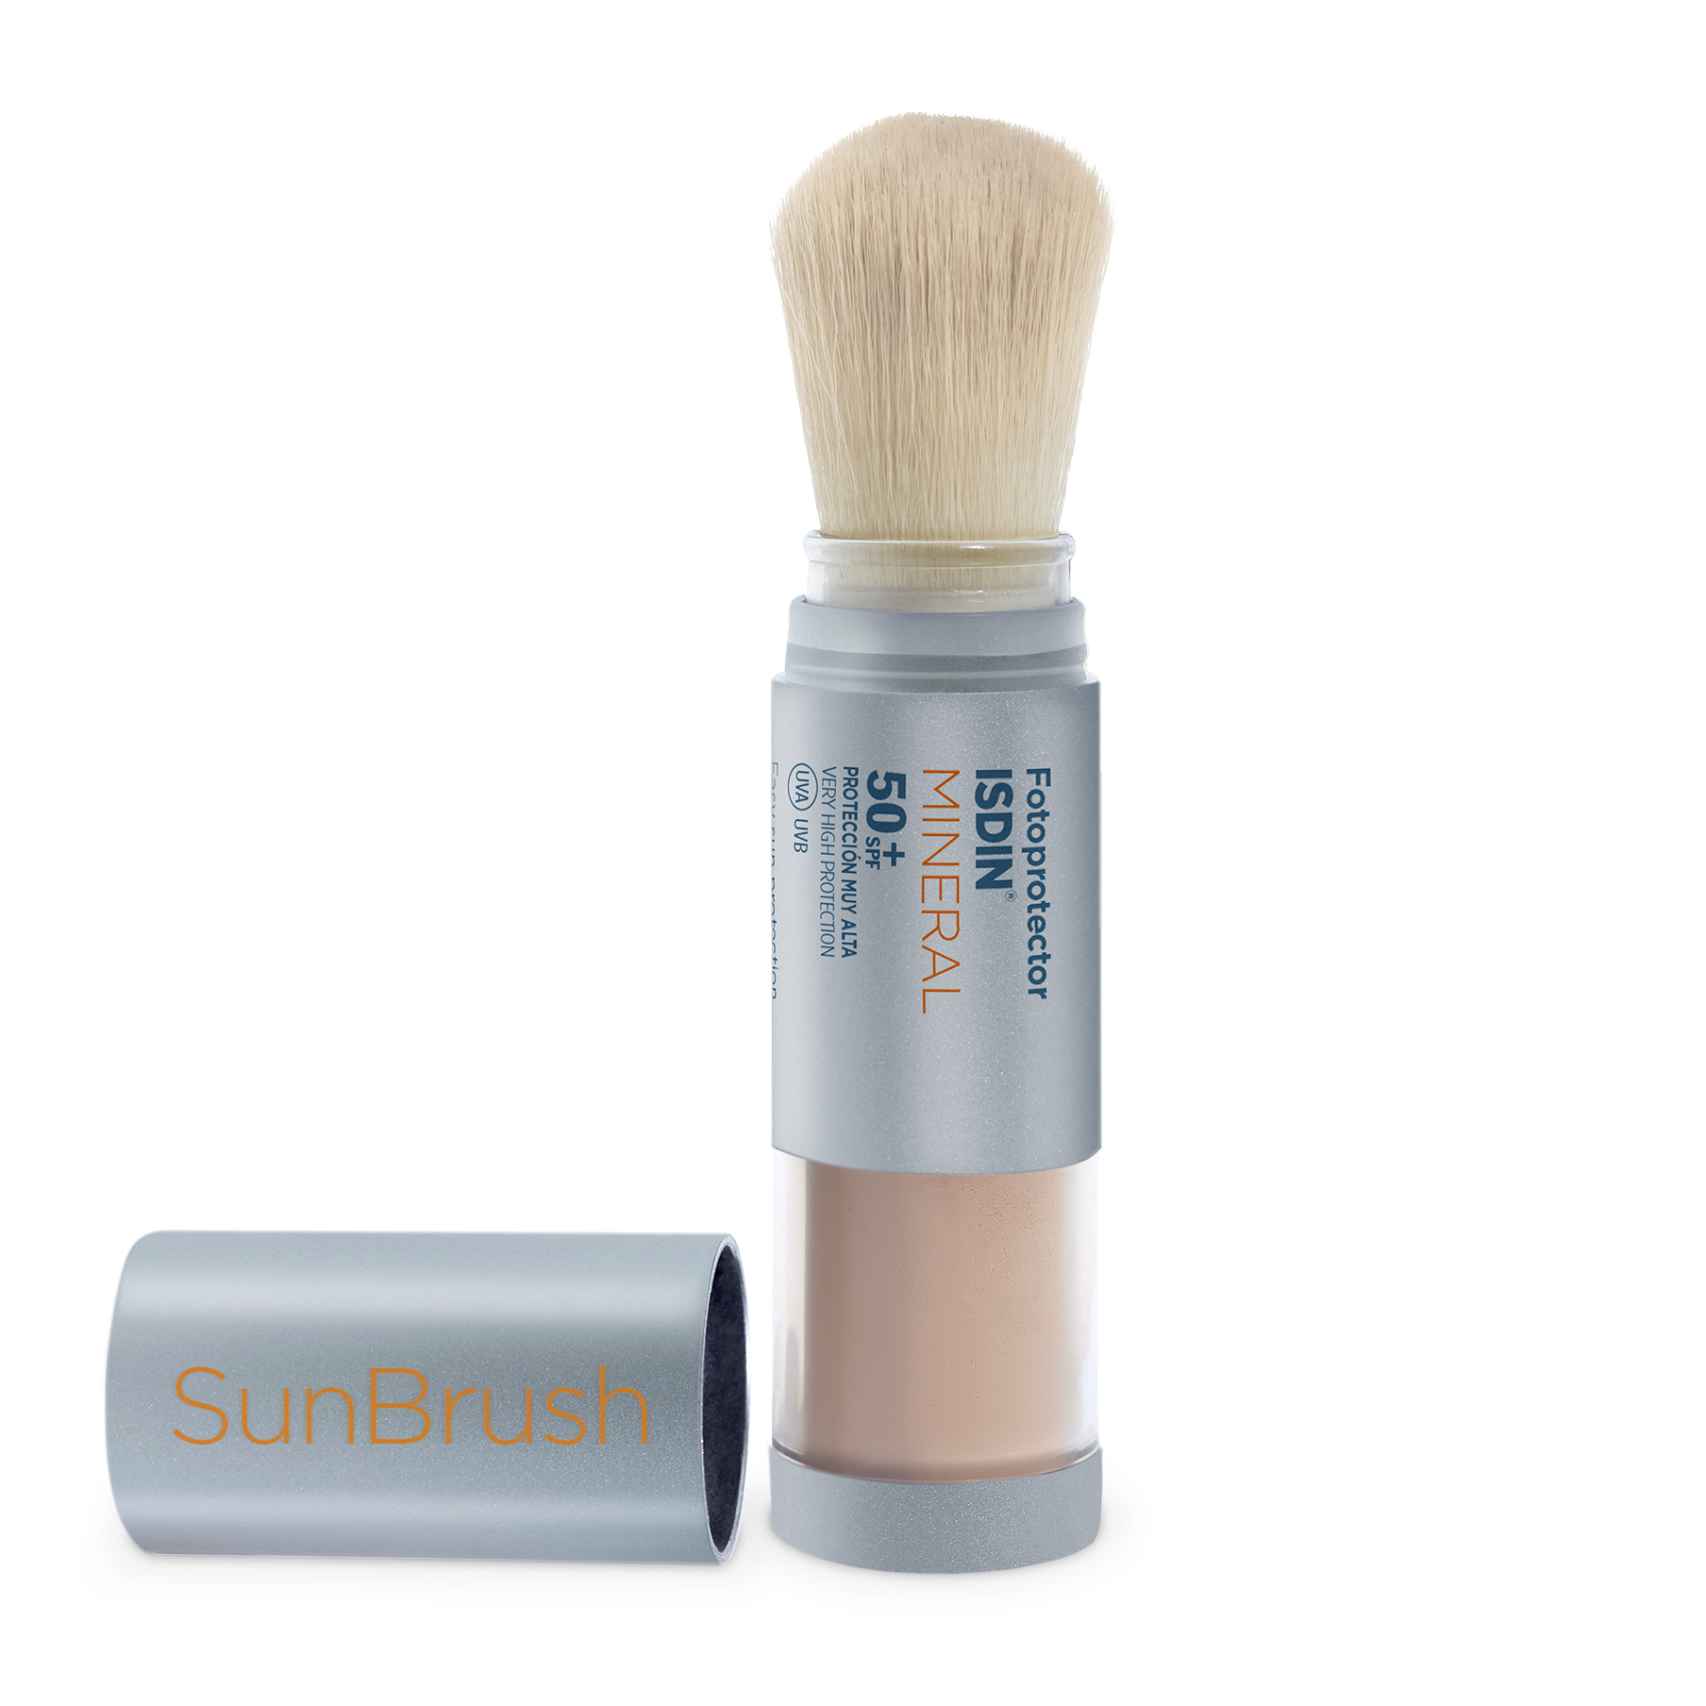 Fotoprotector ISDIN Sunbrush Mineral.